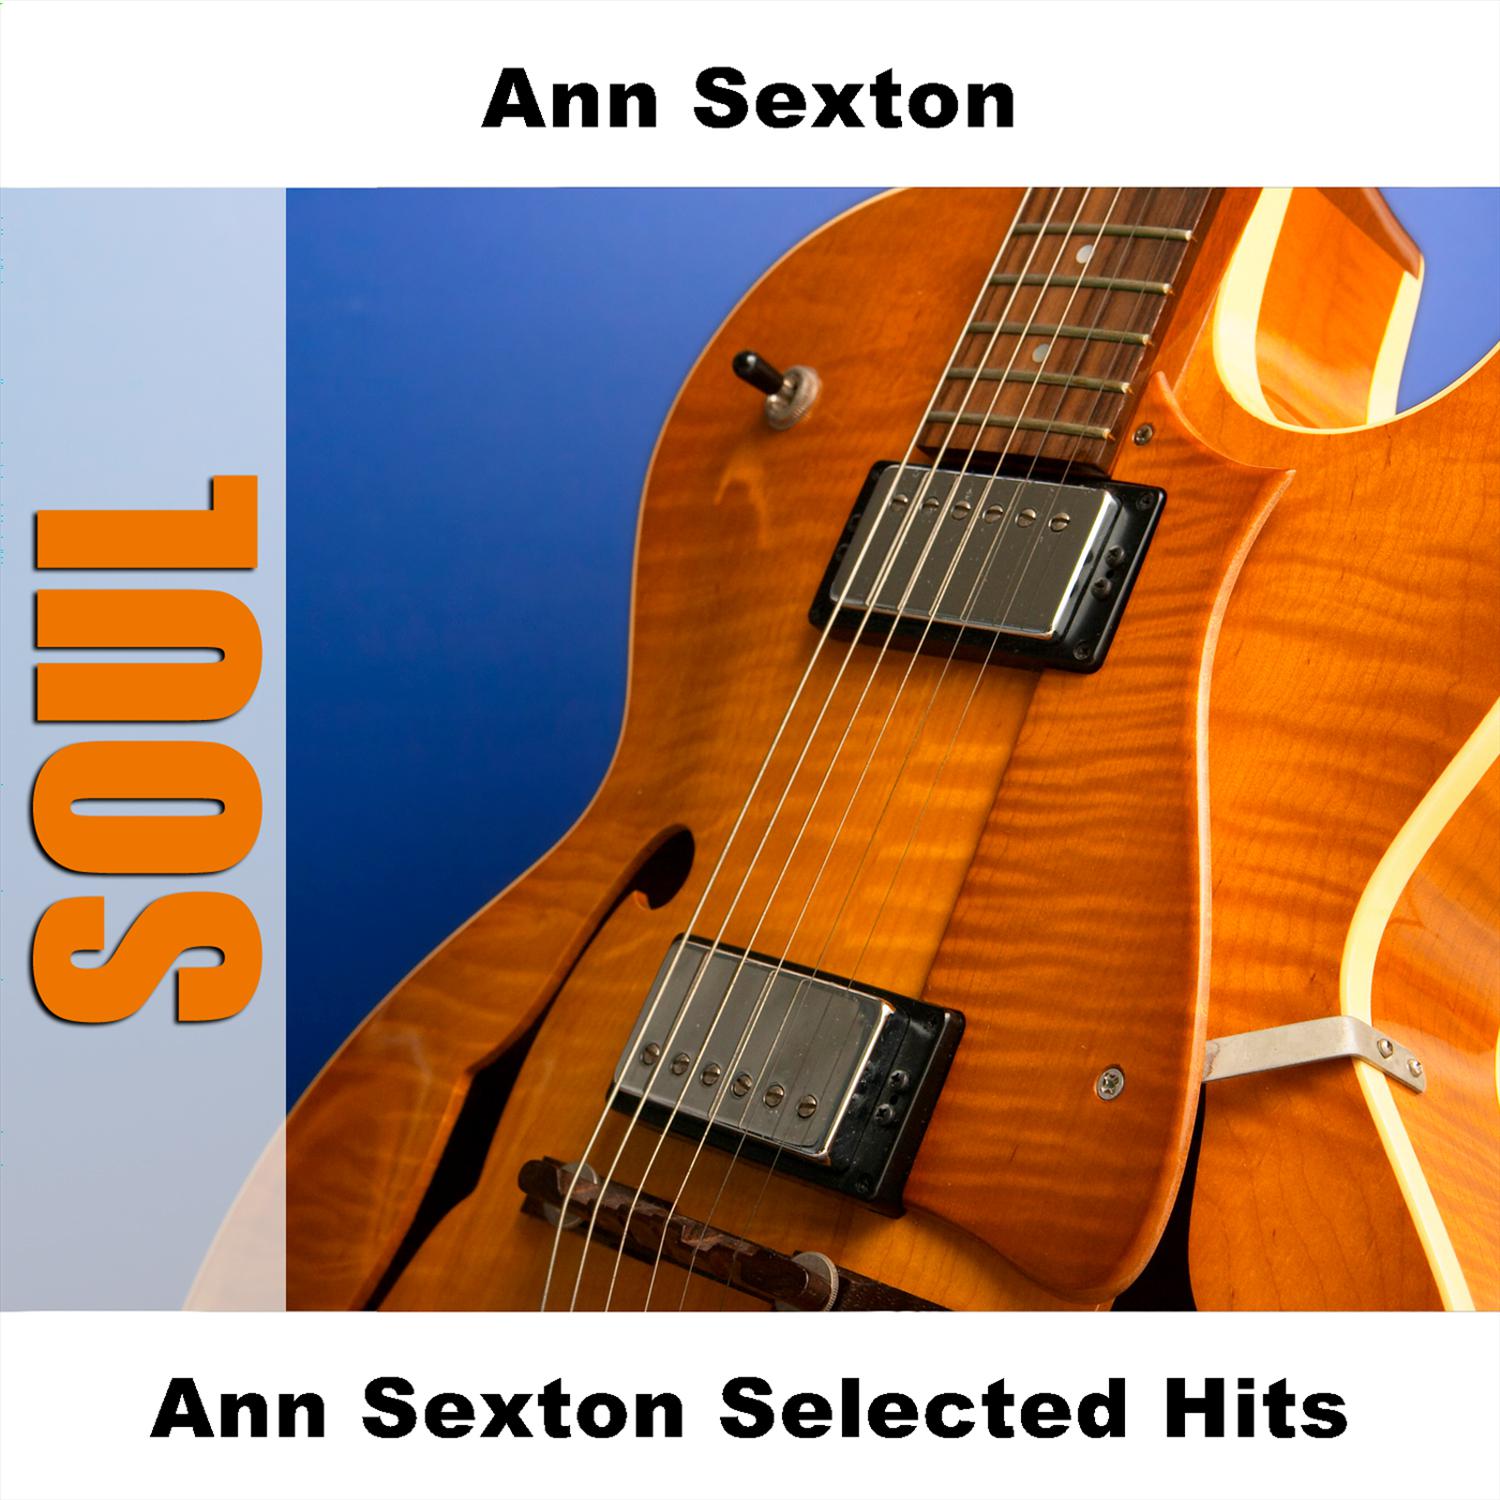 Ann Sexton - I Want To Be Loved - Original